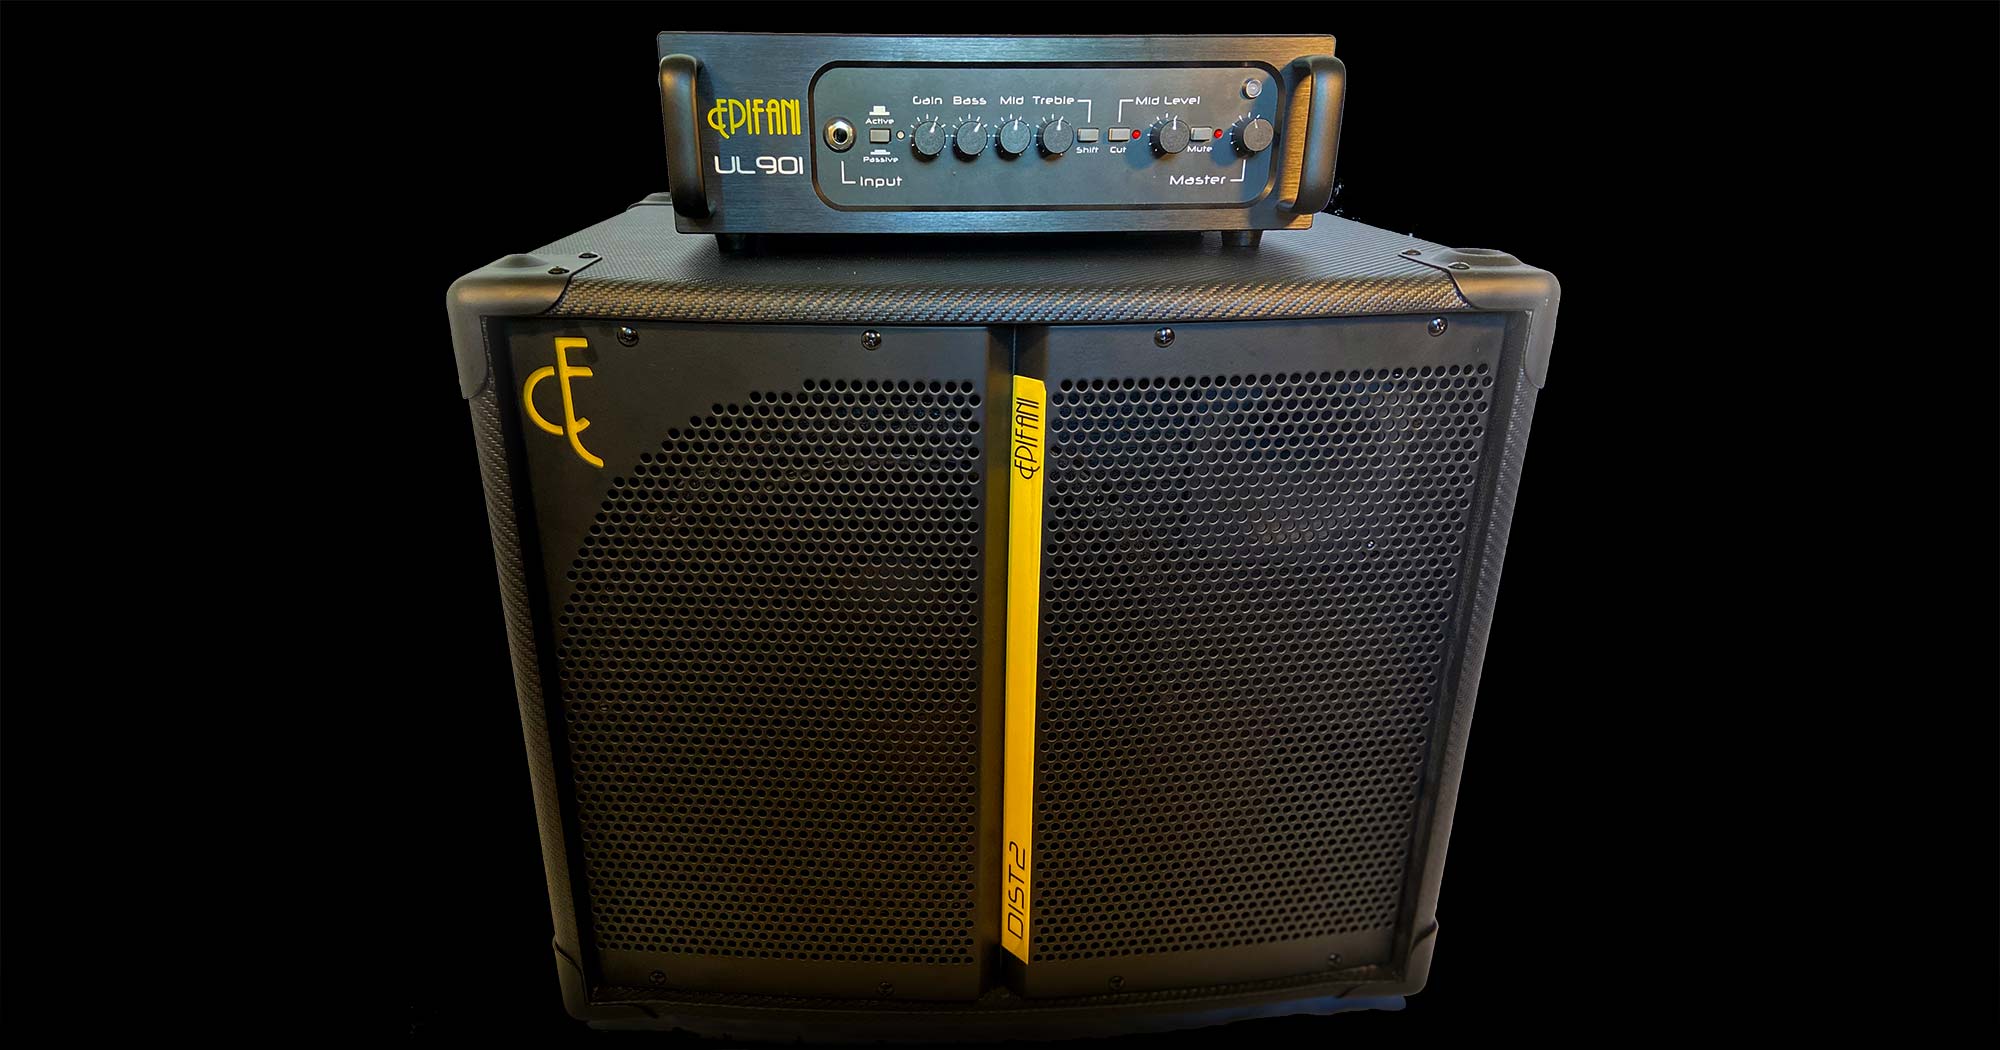 Gear Review: Epifani UL901 Bass Amp and DIST 2 1×12 Cabinet – No